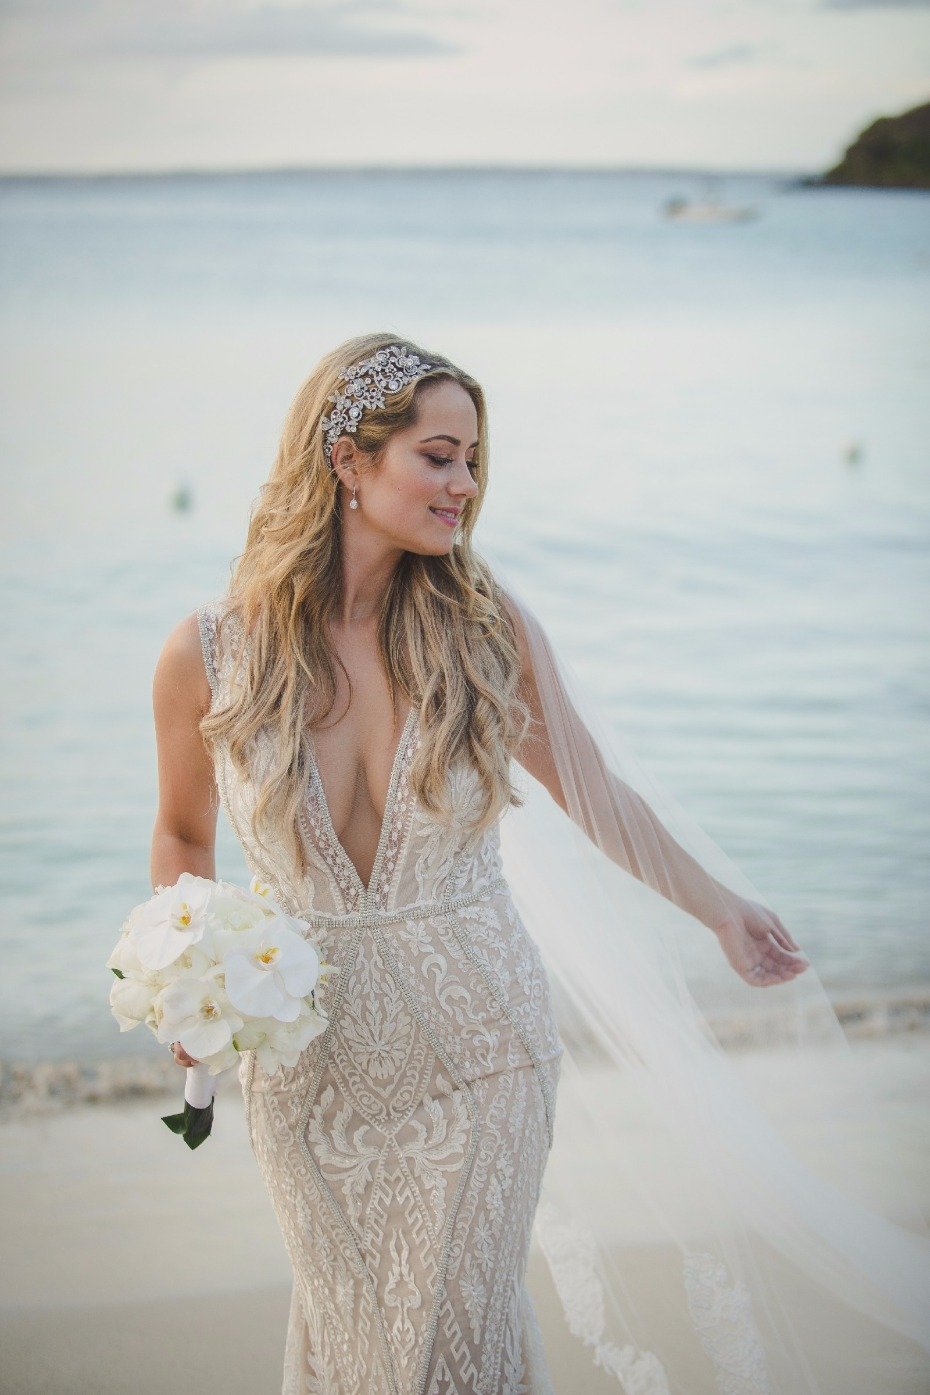 Find this pre-loved Galia Lahav gown on Still White